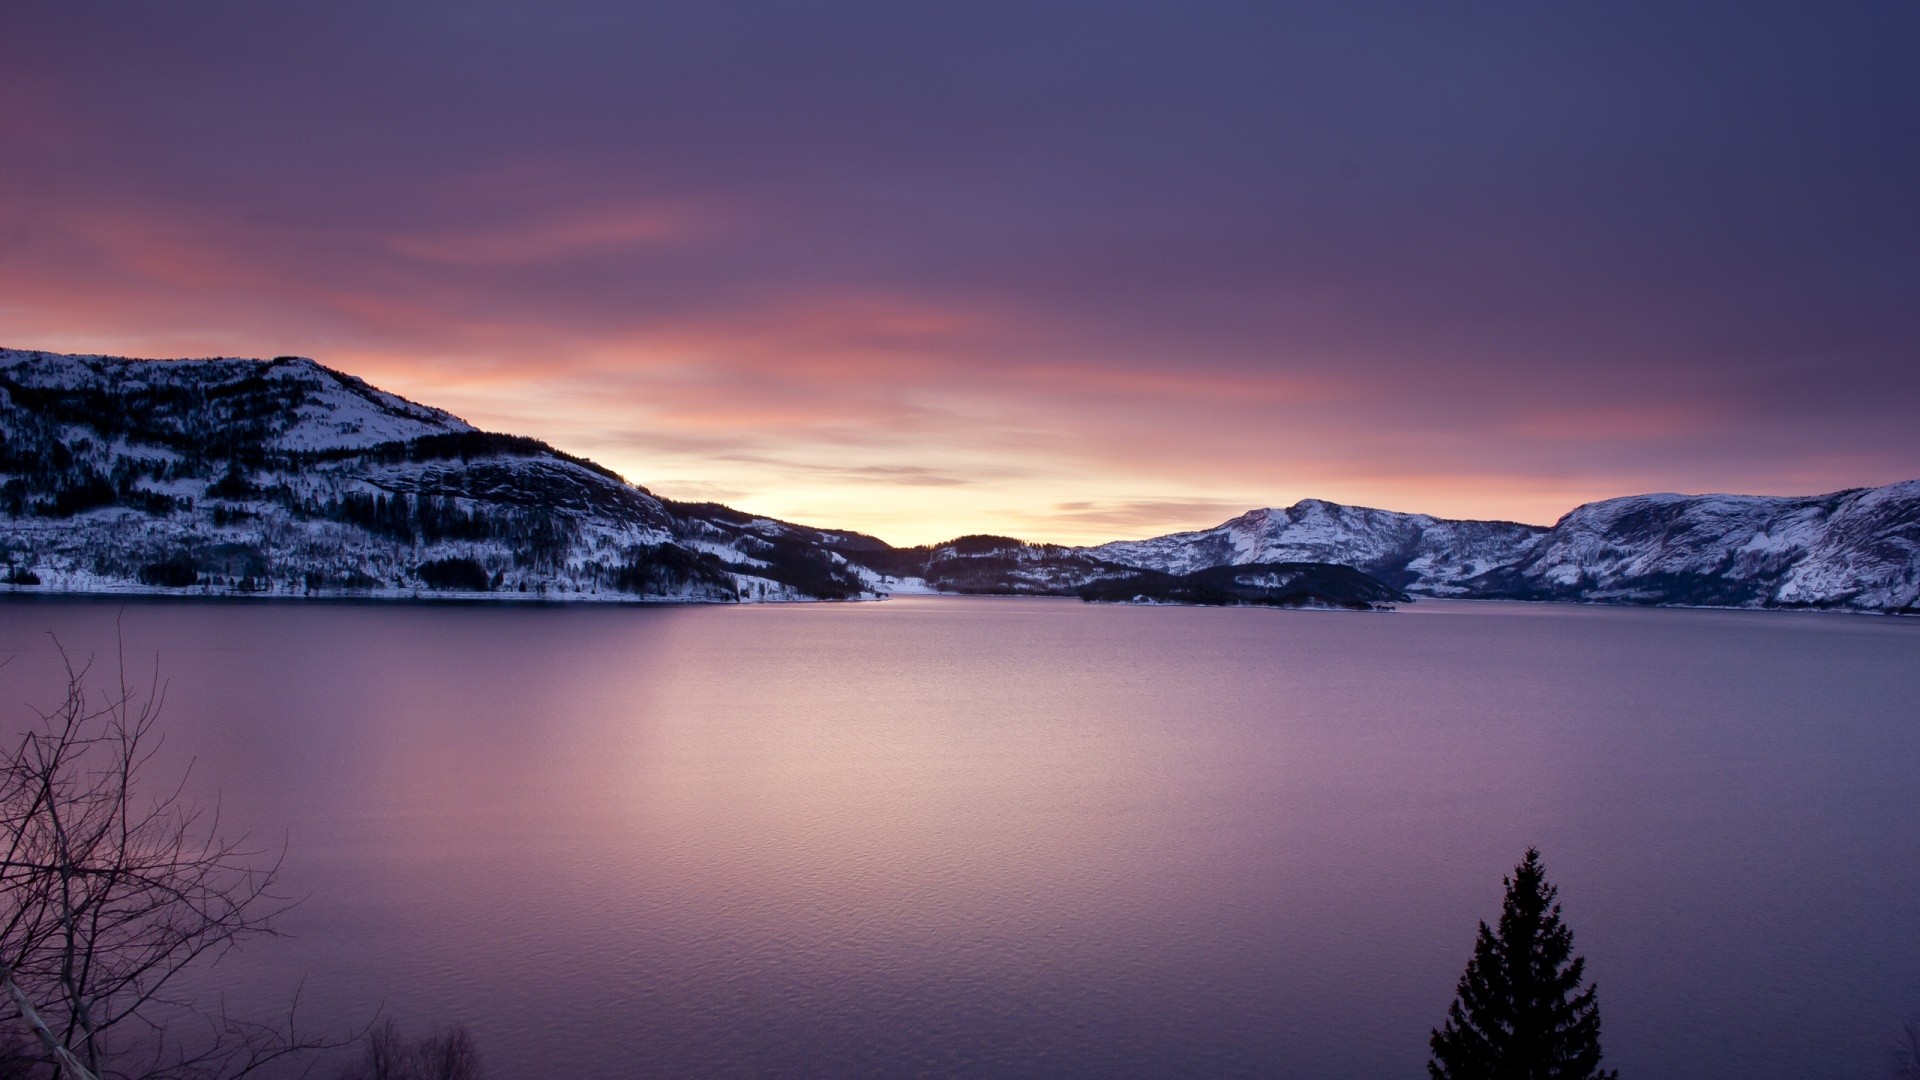 General 1920x1080 nature lake mountains landscape winter cold outdoors Norway